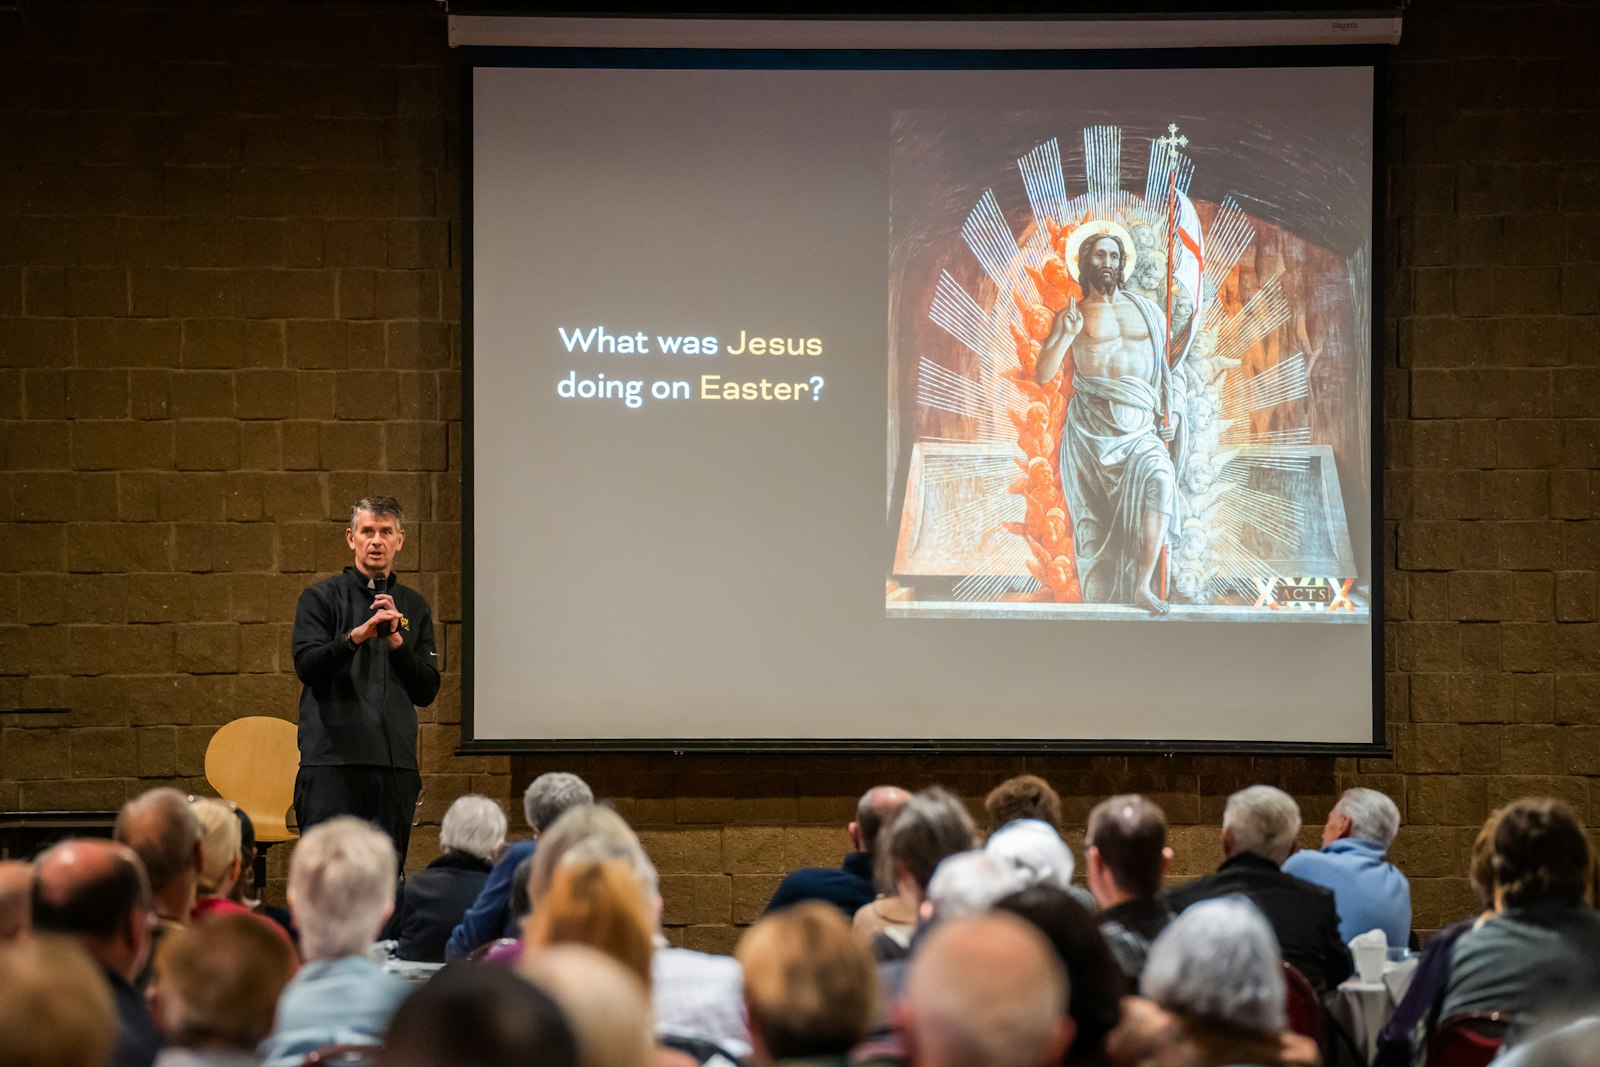 It's easy to become overwhelmed at the magnitude of the faith, Fr. Riccardo said, but the crux of the matter is simple: Jesus died and rose on Easter morning to reclaim the world from Satan's grasp, and it's this good news that's the heart of the Gospel message.